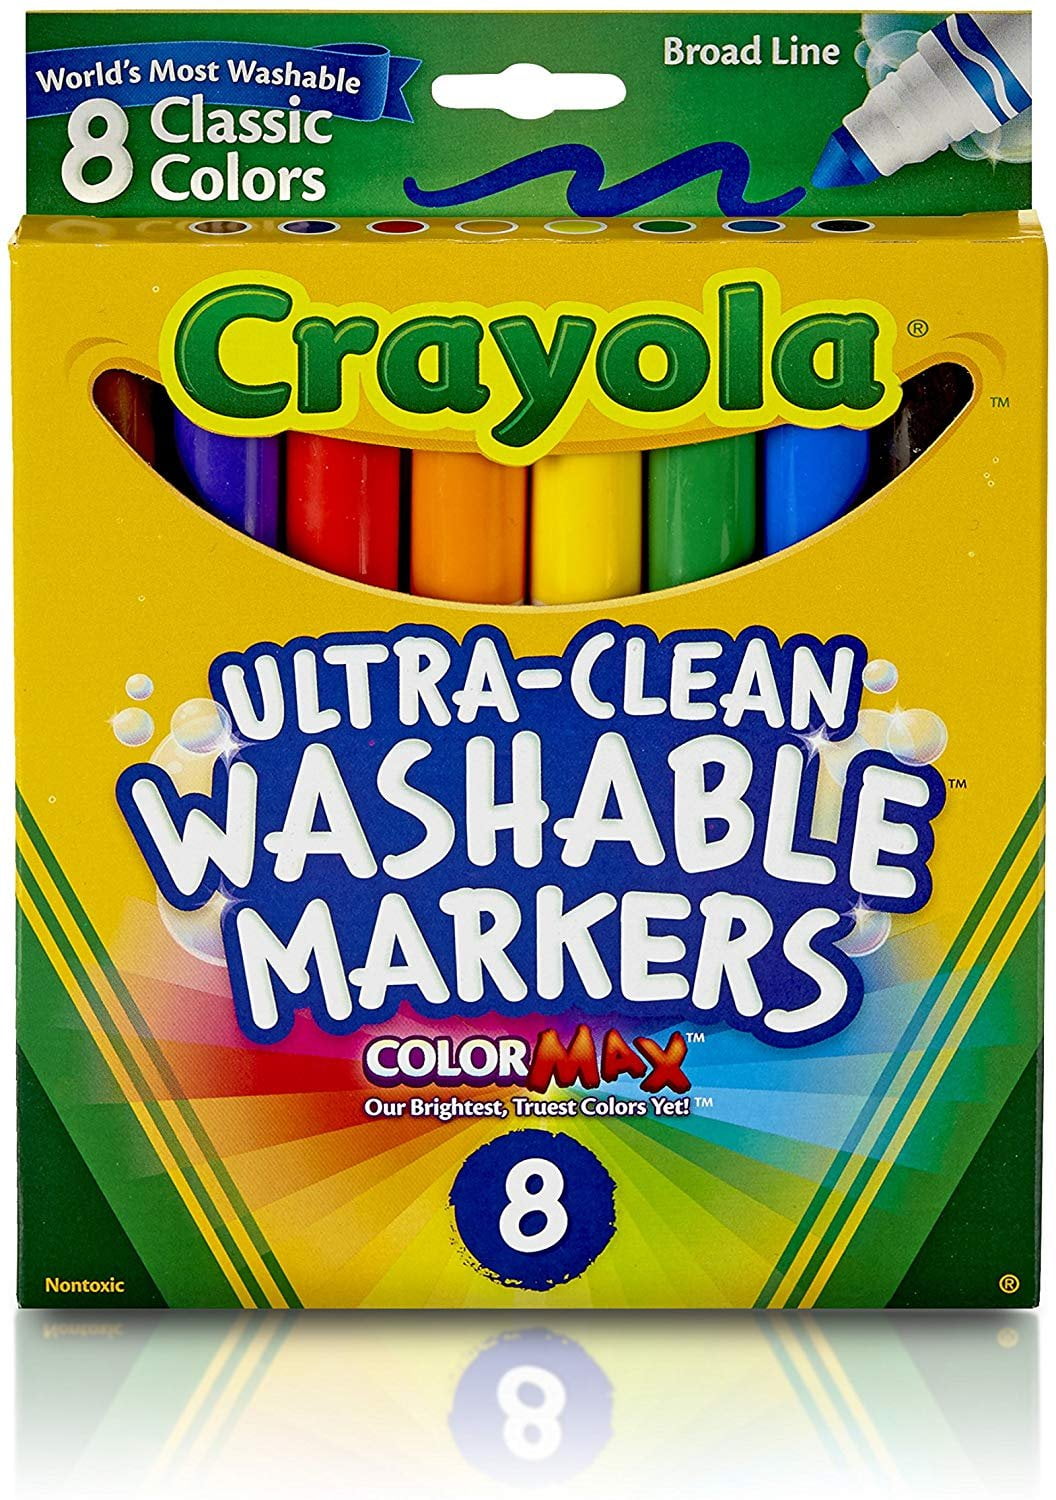 | Includes 5 Color Flag Set Crayola Broad Point Washable Markers - 68-7508 | Crayola 8ct Washable Tropical Colors Conical Tip| Crayola Twistable Colored Pencils 58-7808 